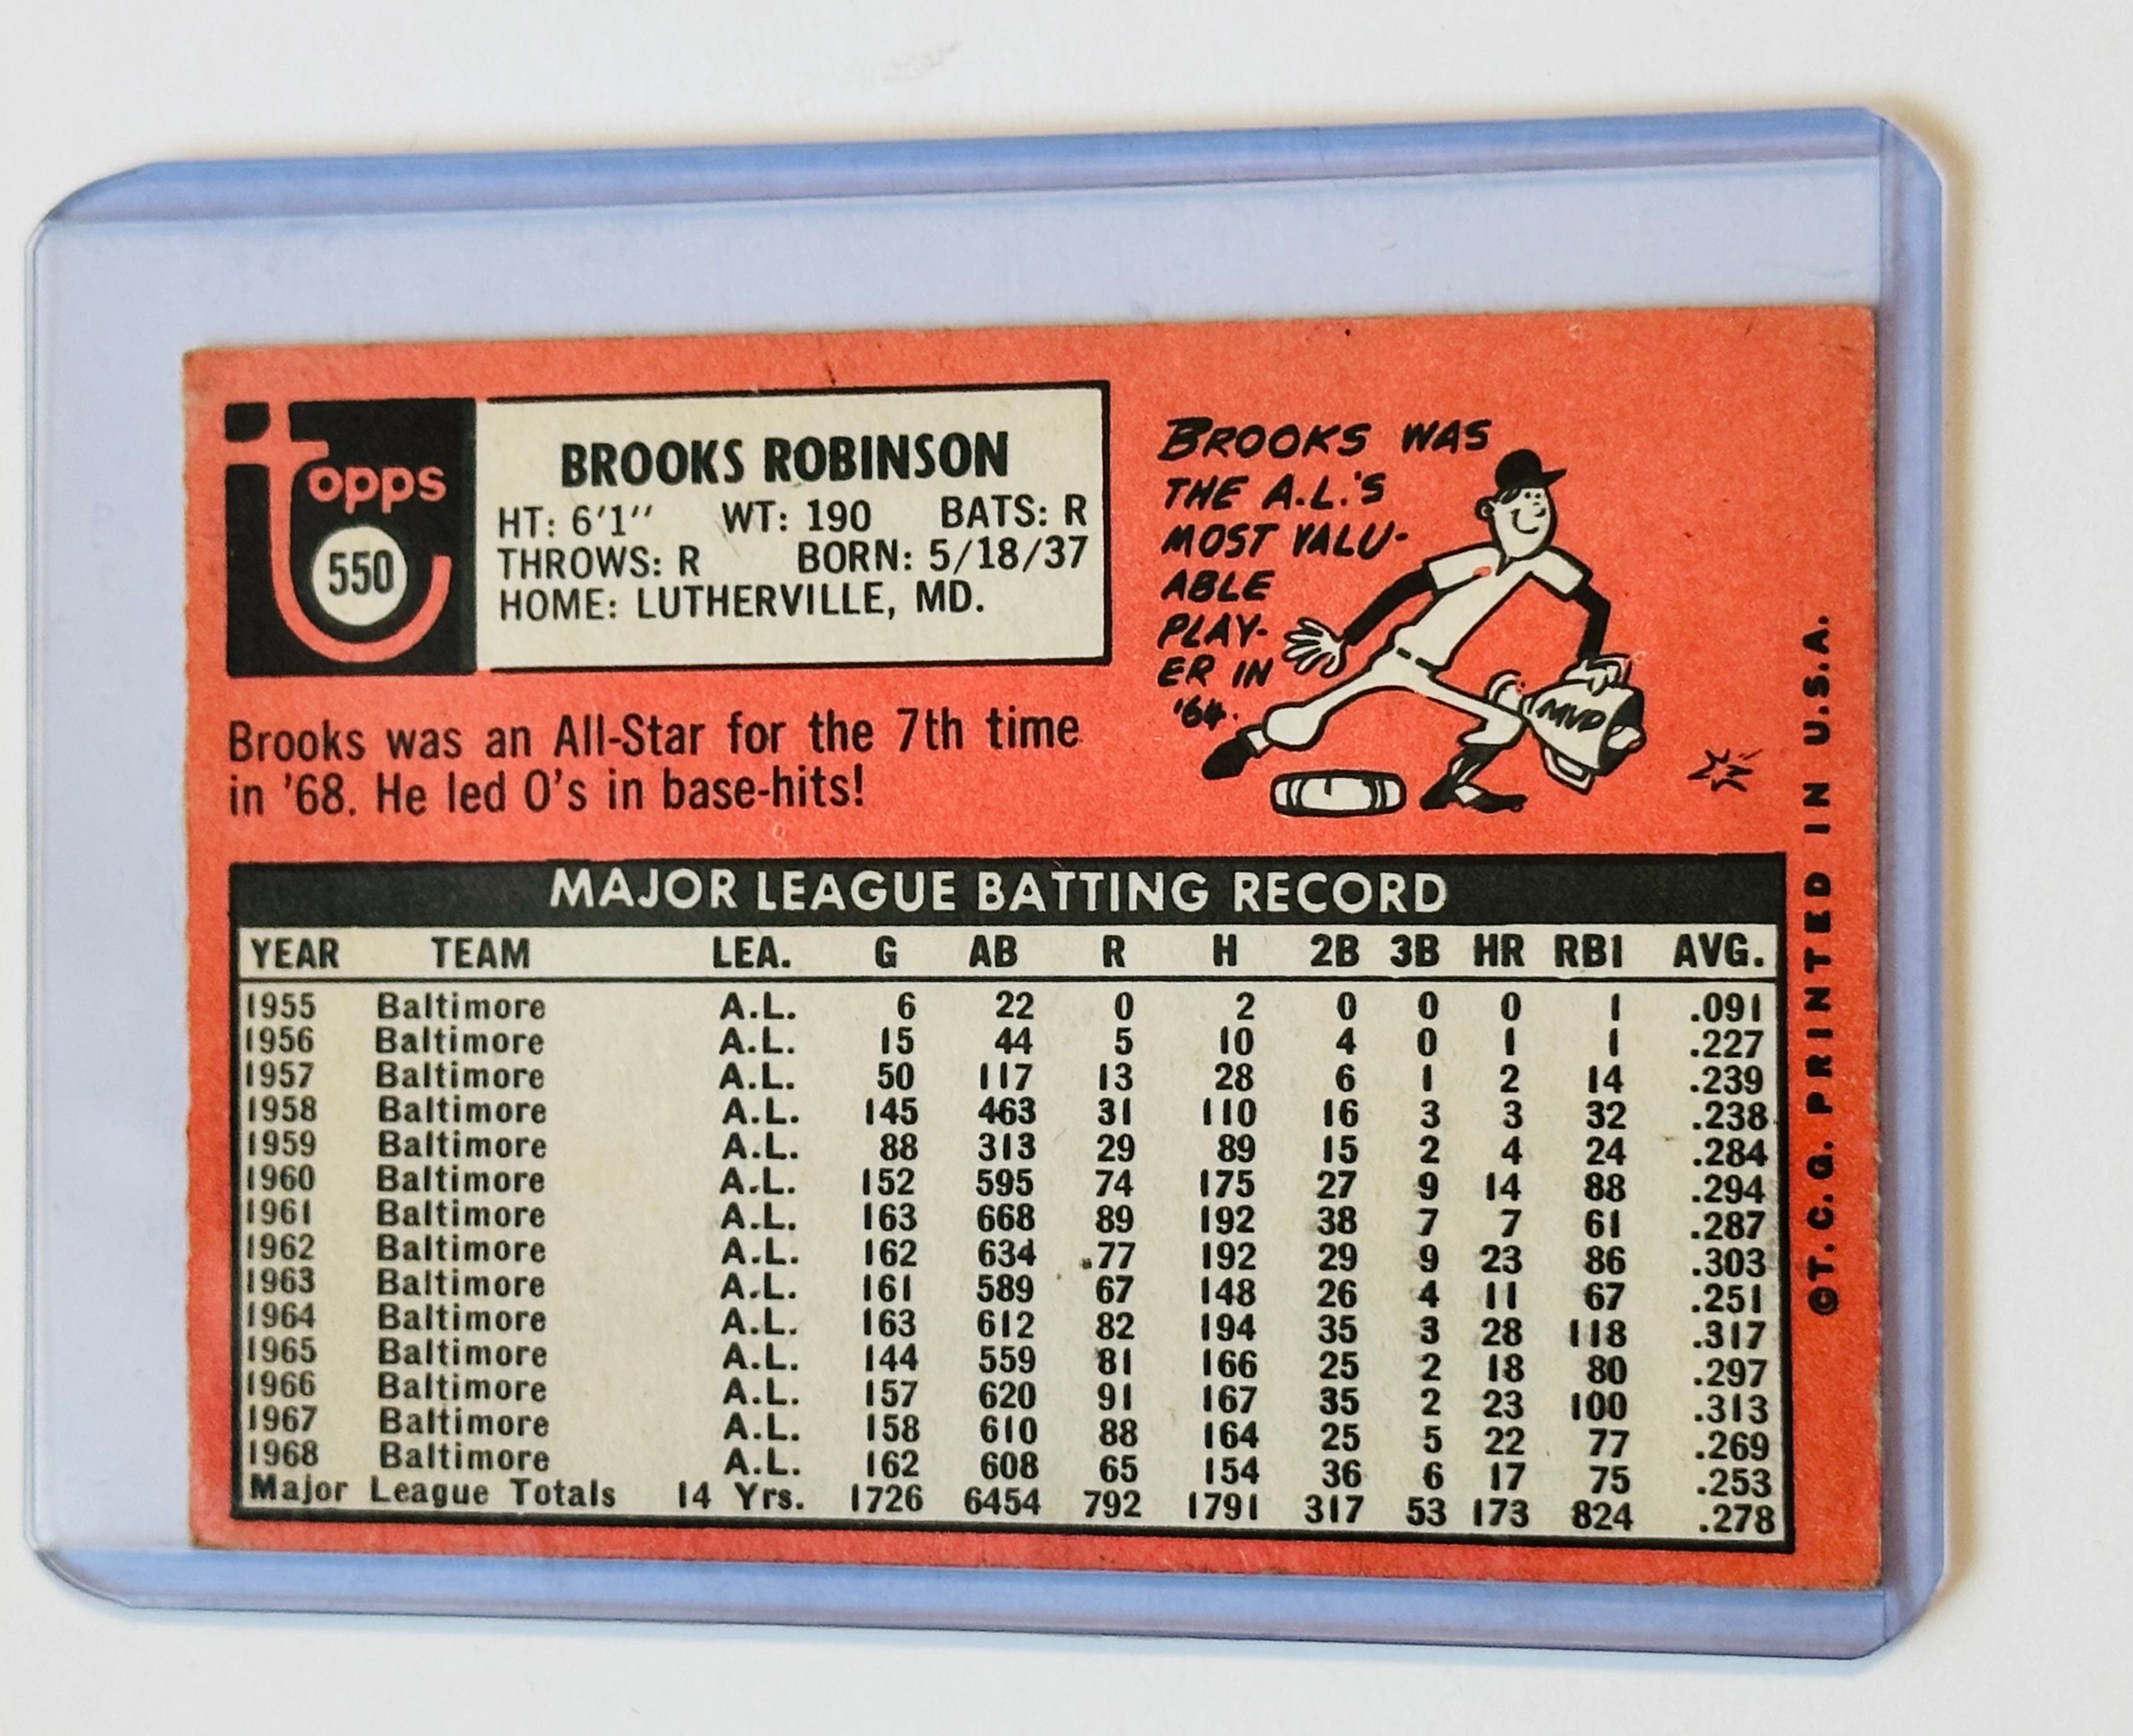 Brooks Robinson Baseball legend autograph card from 1969. Sold with COA